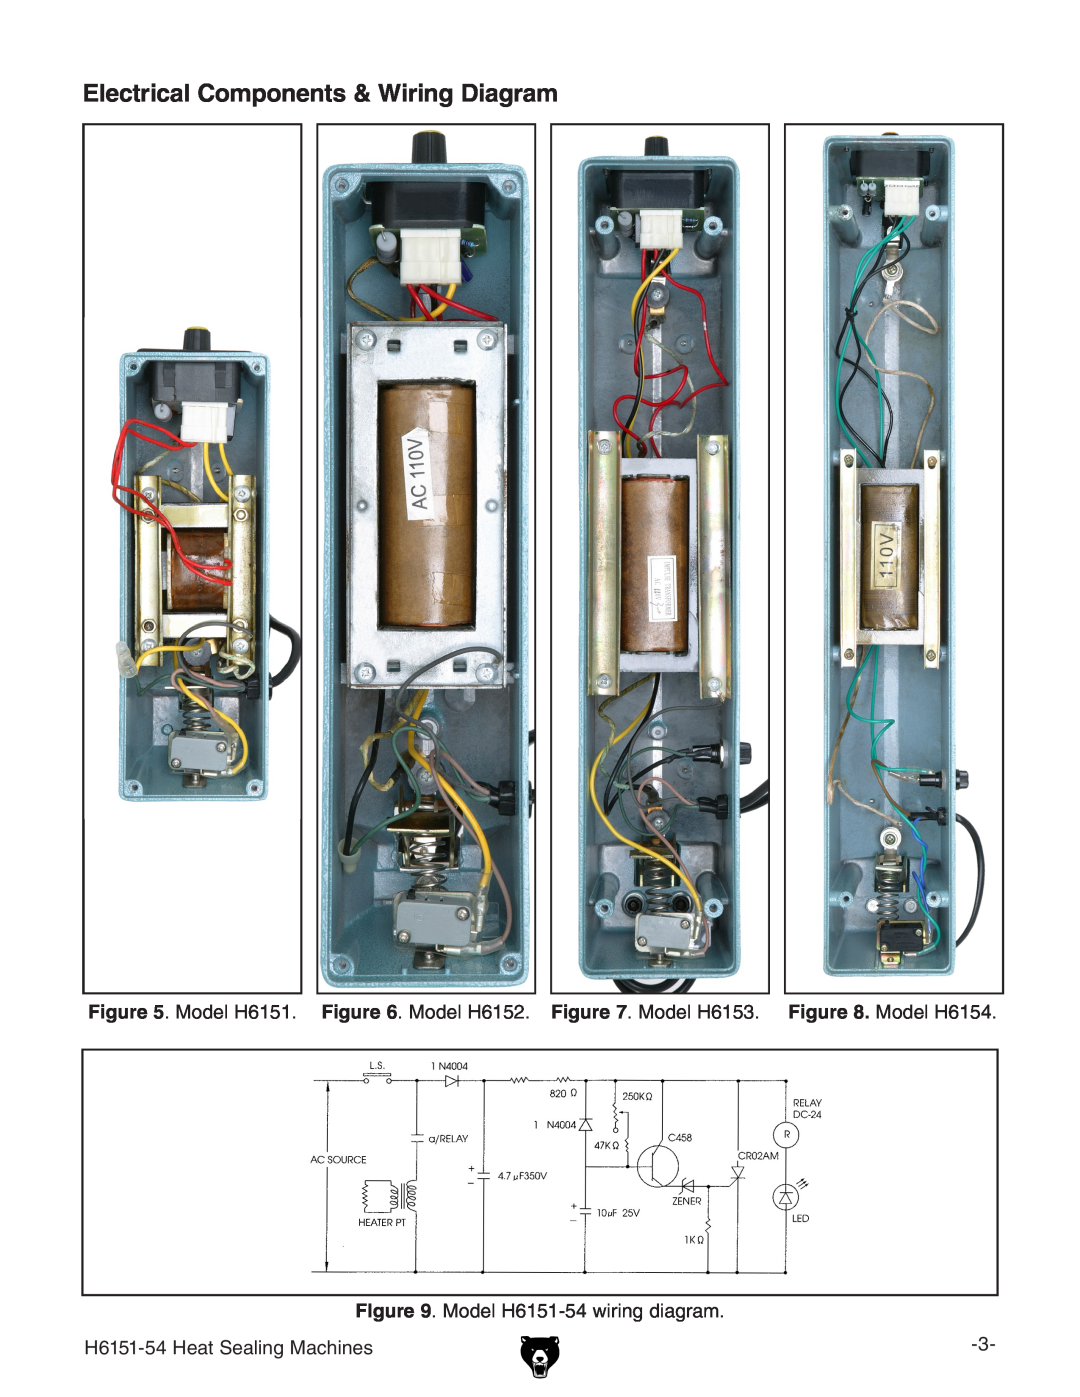 Grizzly Electrical Components & Wiring Diagram, Model H6151-54 wiring diagram, H6151-54 Heat Sealing Machines 